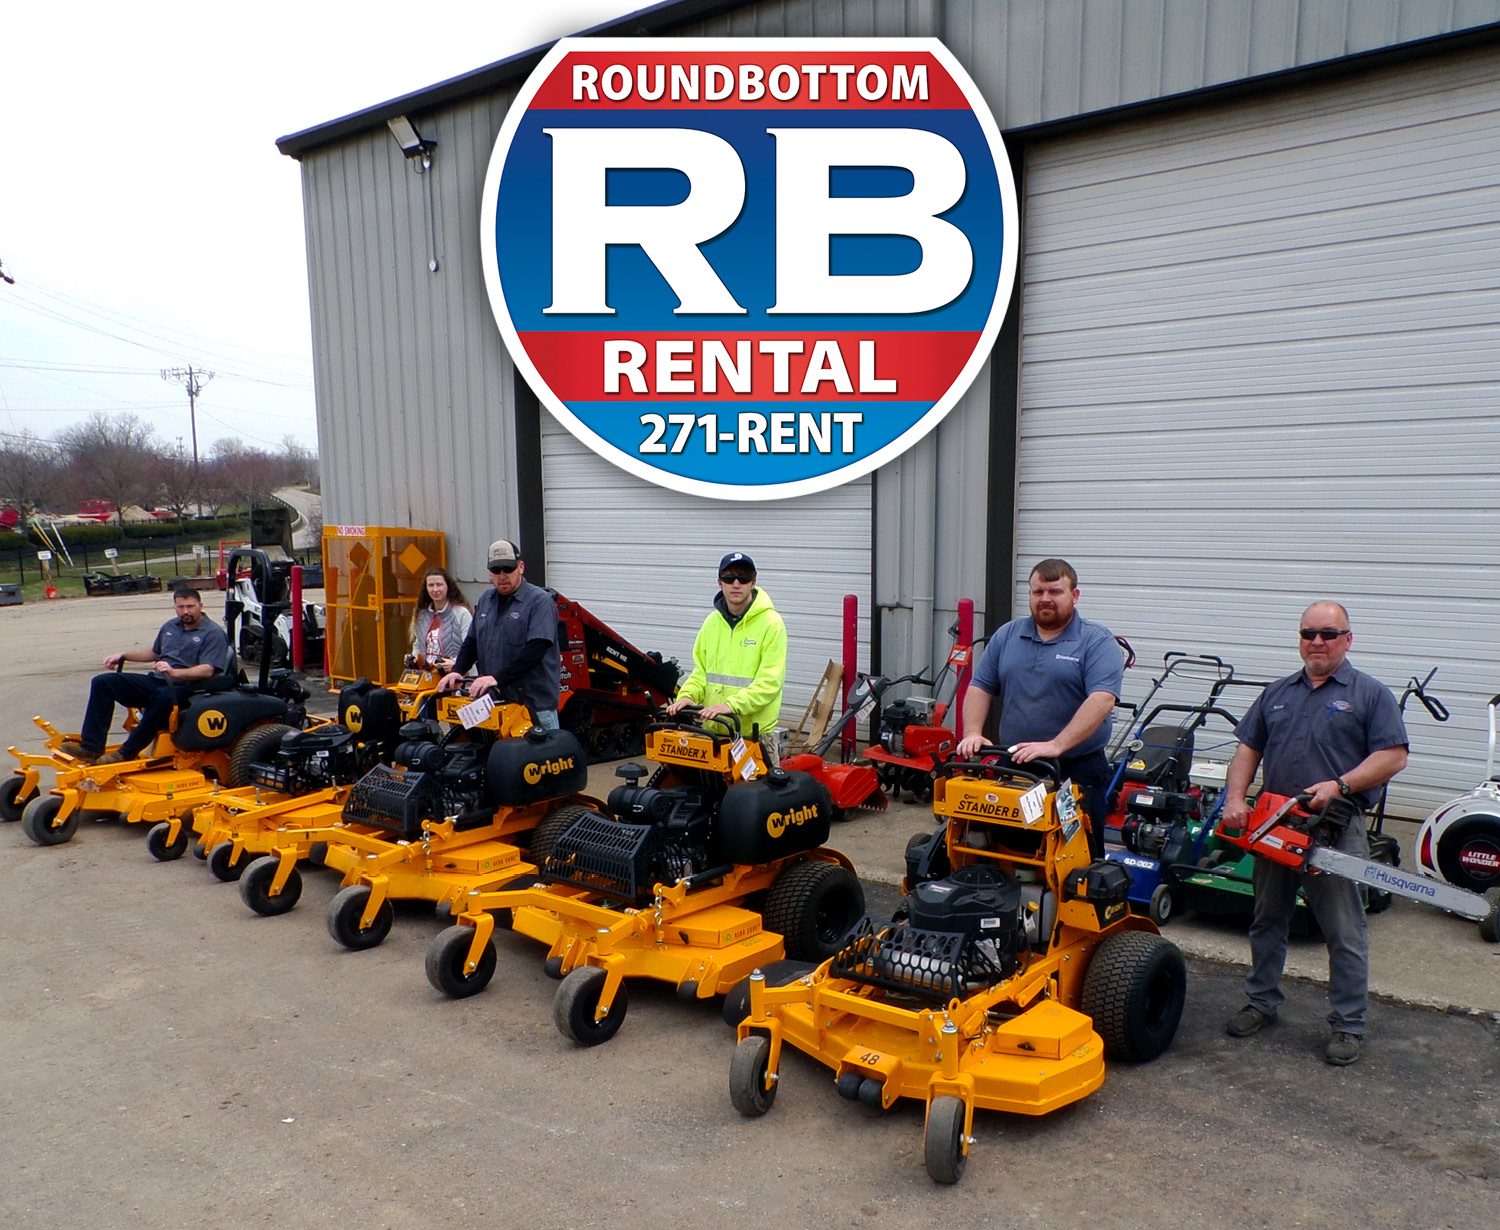 Round Bottom Rental - Equipment rental & sale for your project needs